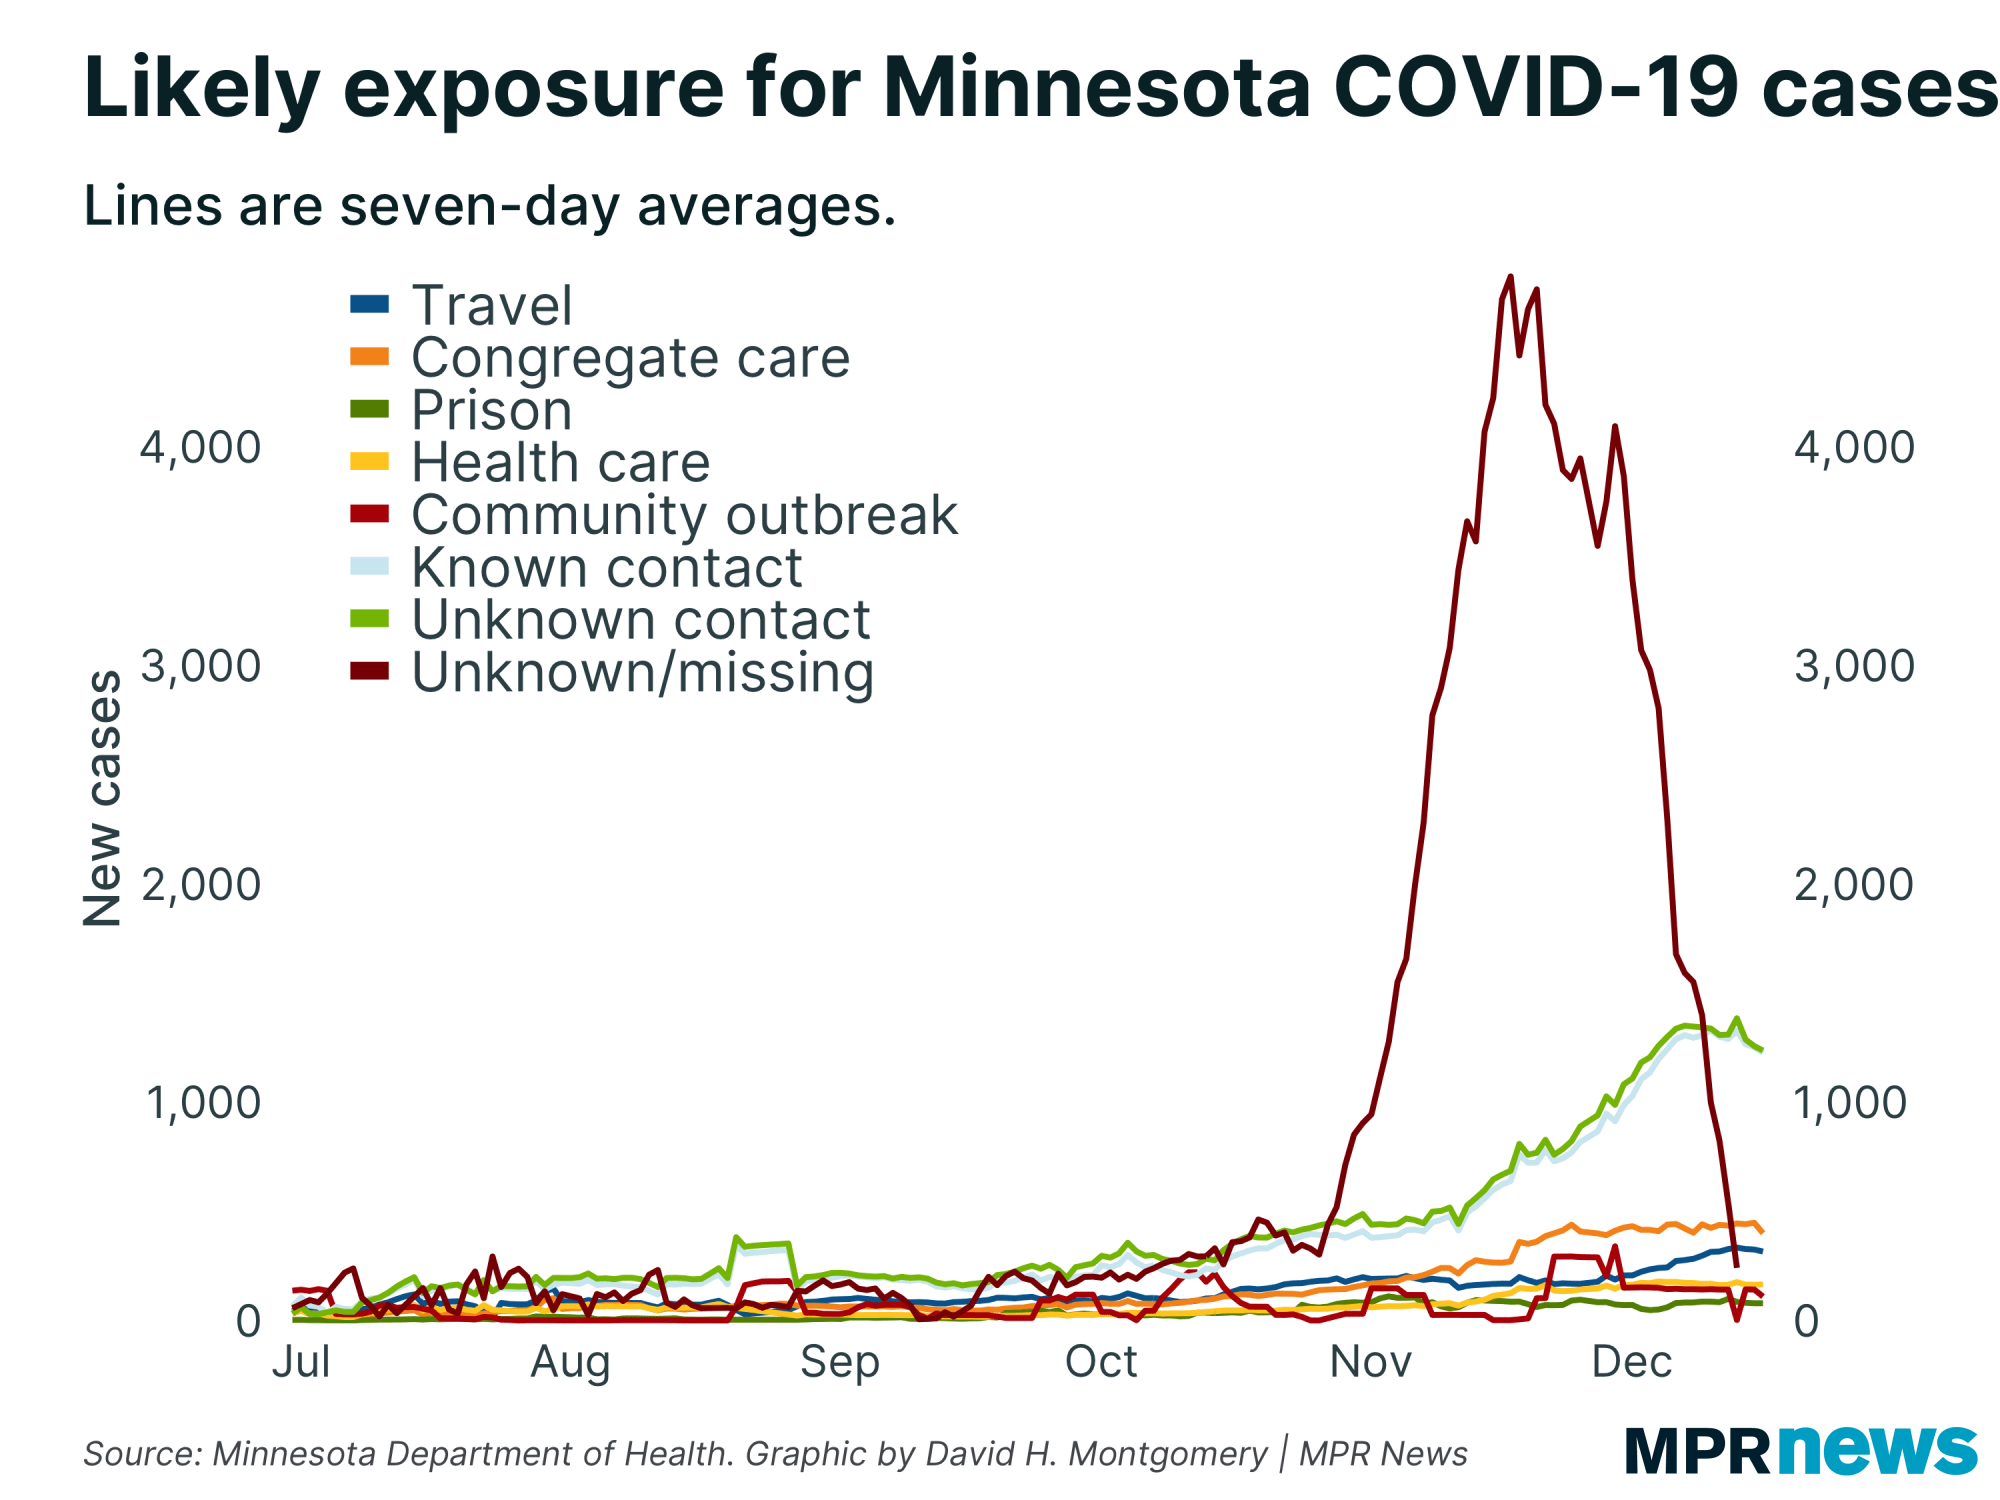 Graphic: Likely exposure for COVID-19 cases in Minnesota. 